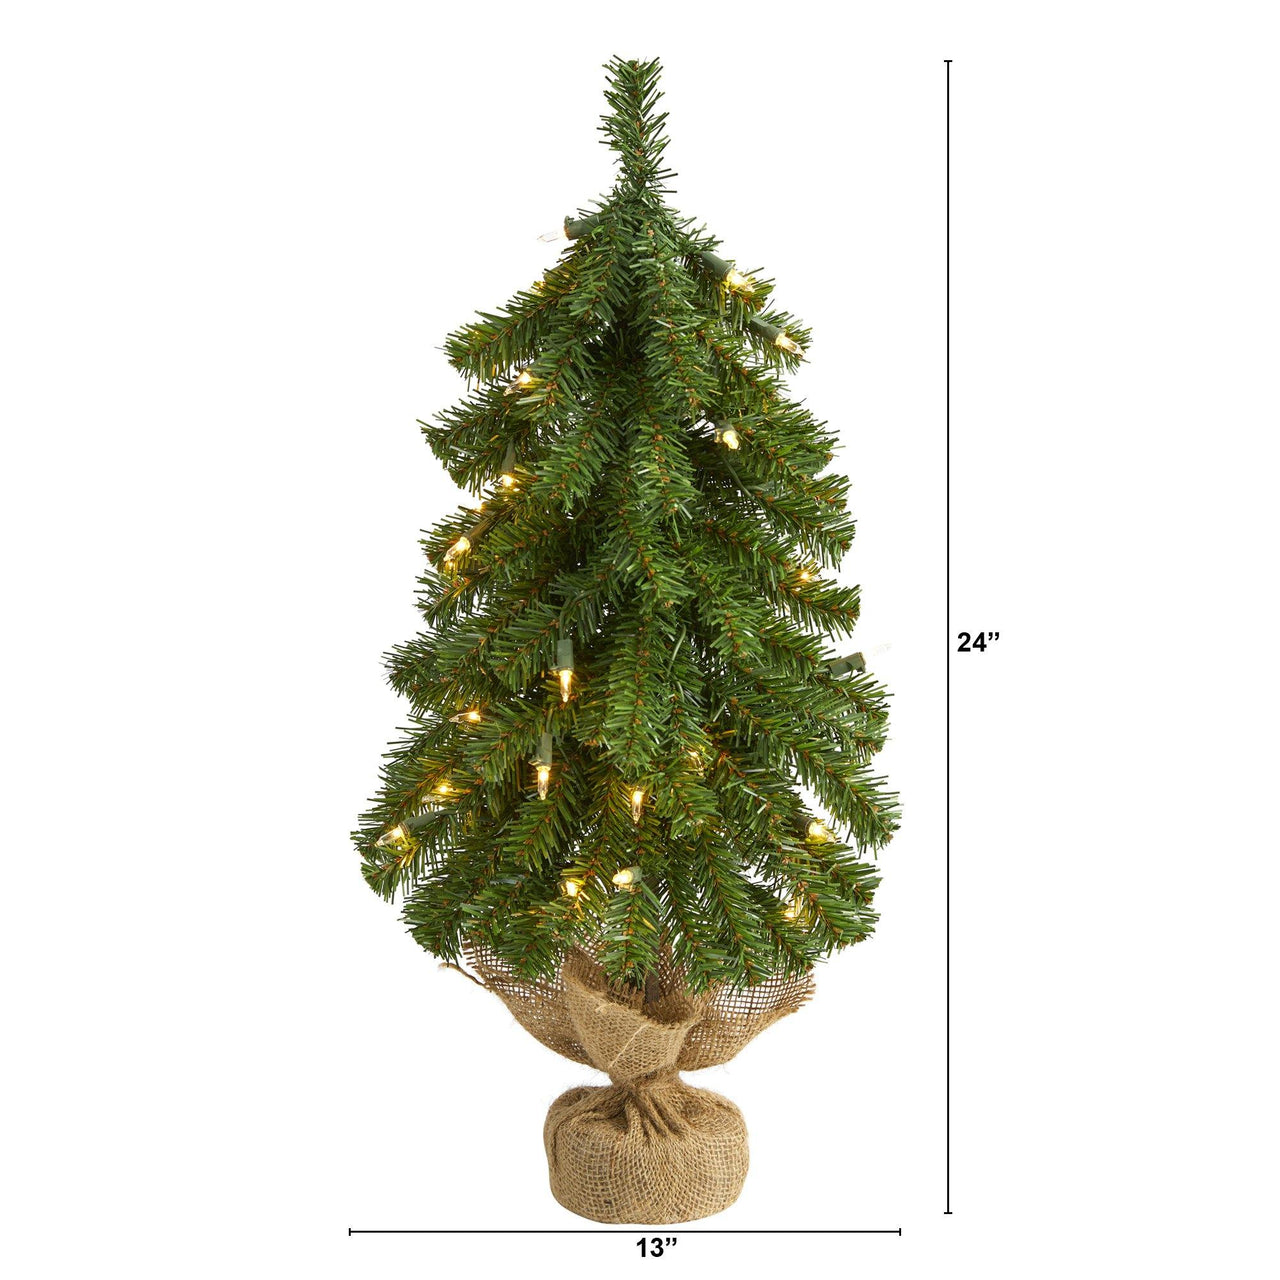 2’ Alpine Artificial Christmas Tree with 35 Lights, 92 Bendable Branches and a Burlap Planter - The Fox Decor